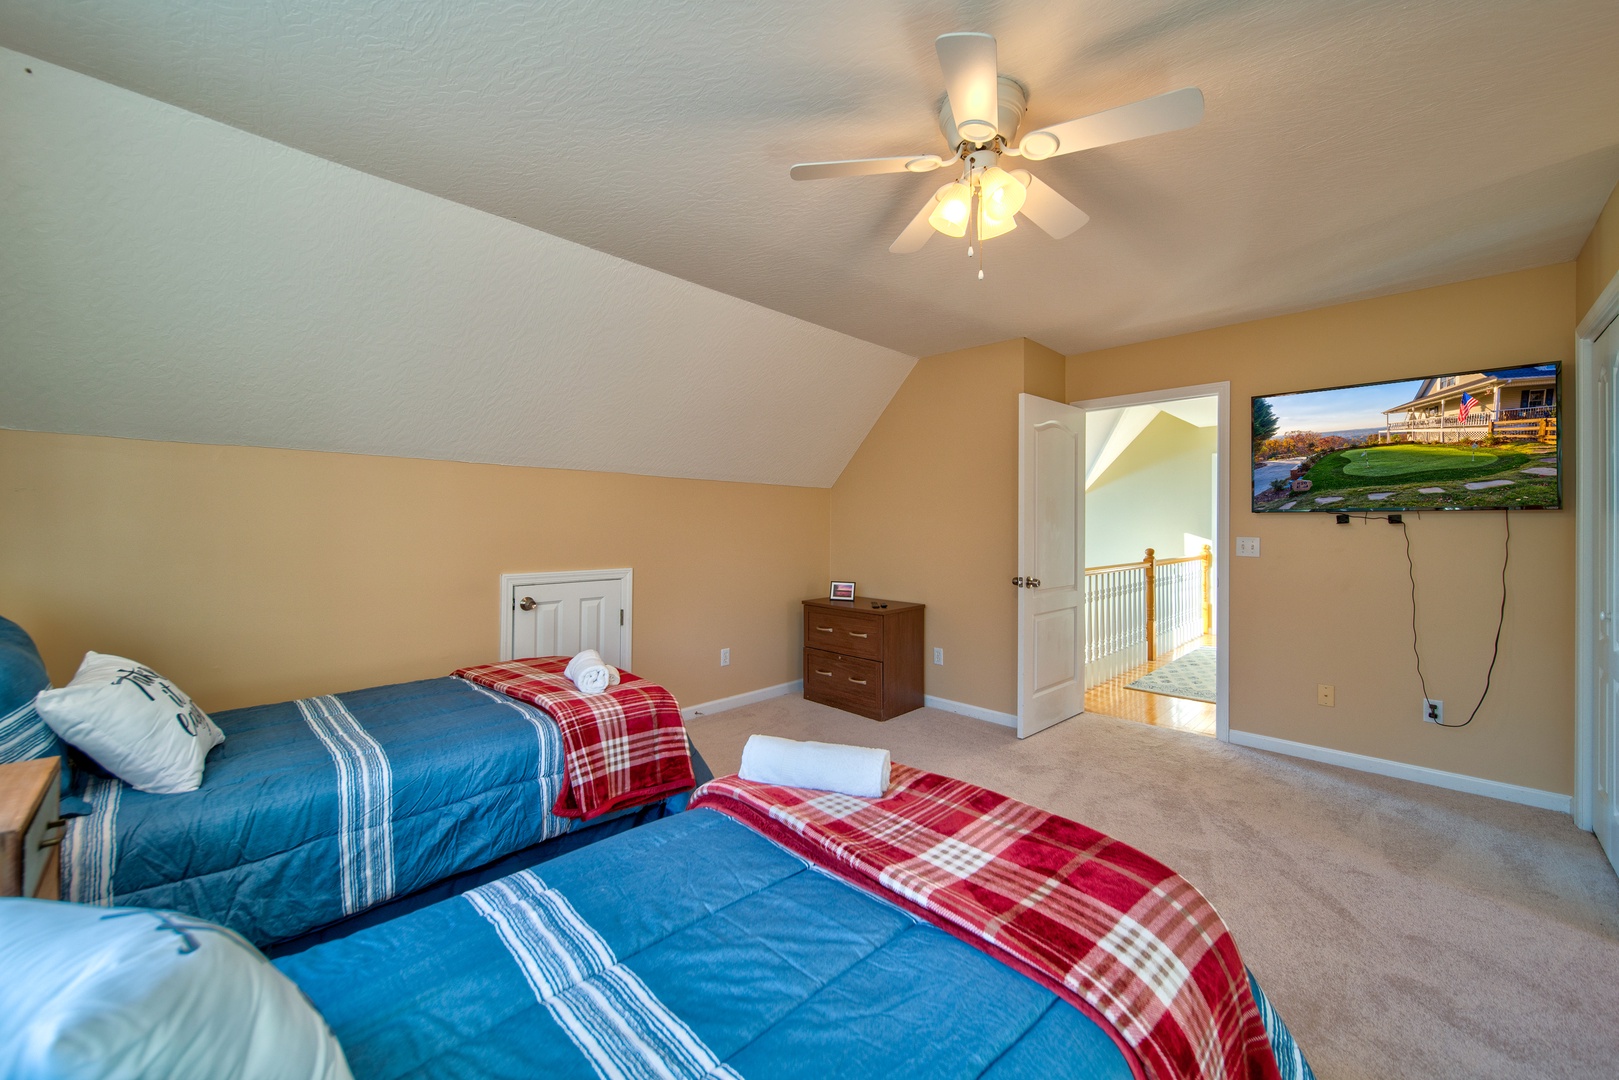 The second of two 2nd floor bedrooms, offering a pair of cozy twin beds